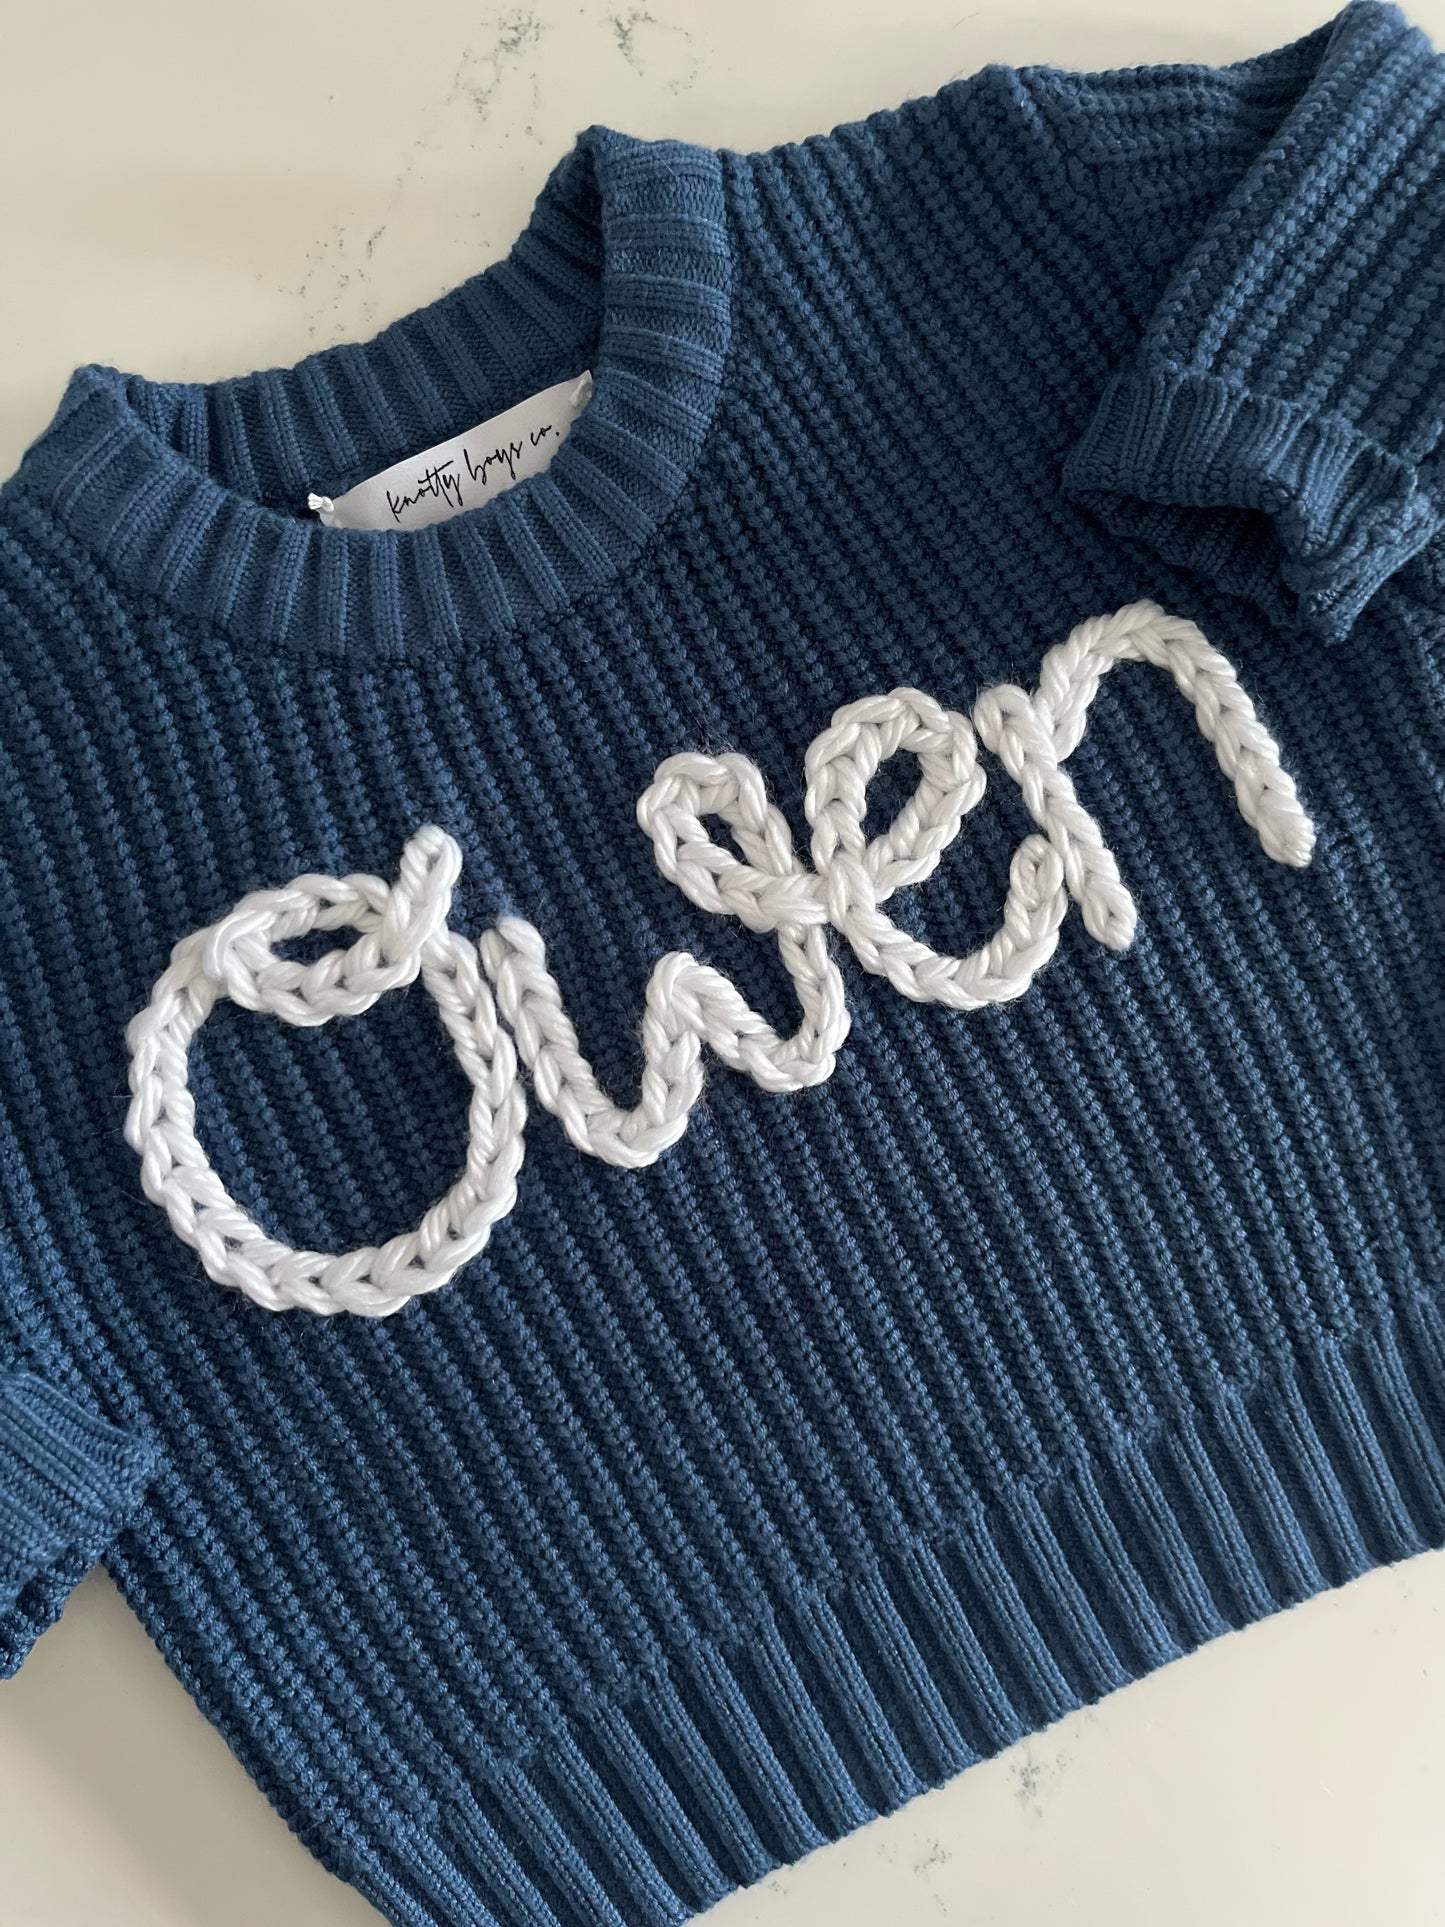 Personalized Sweater in Navy